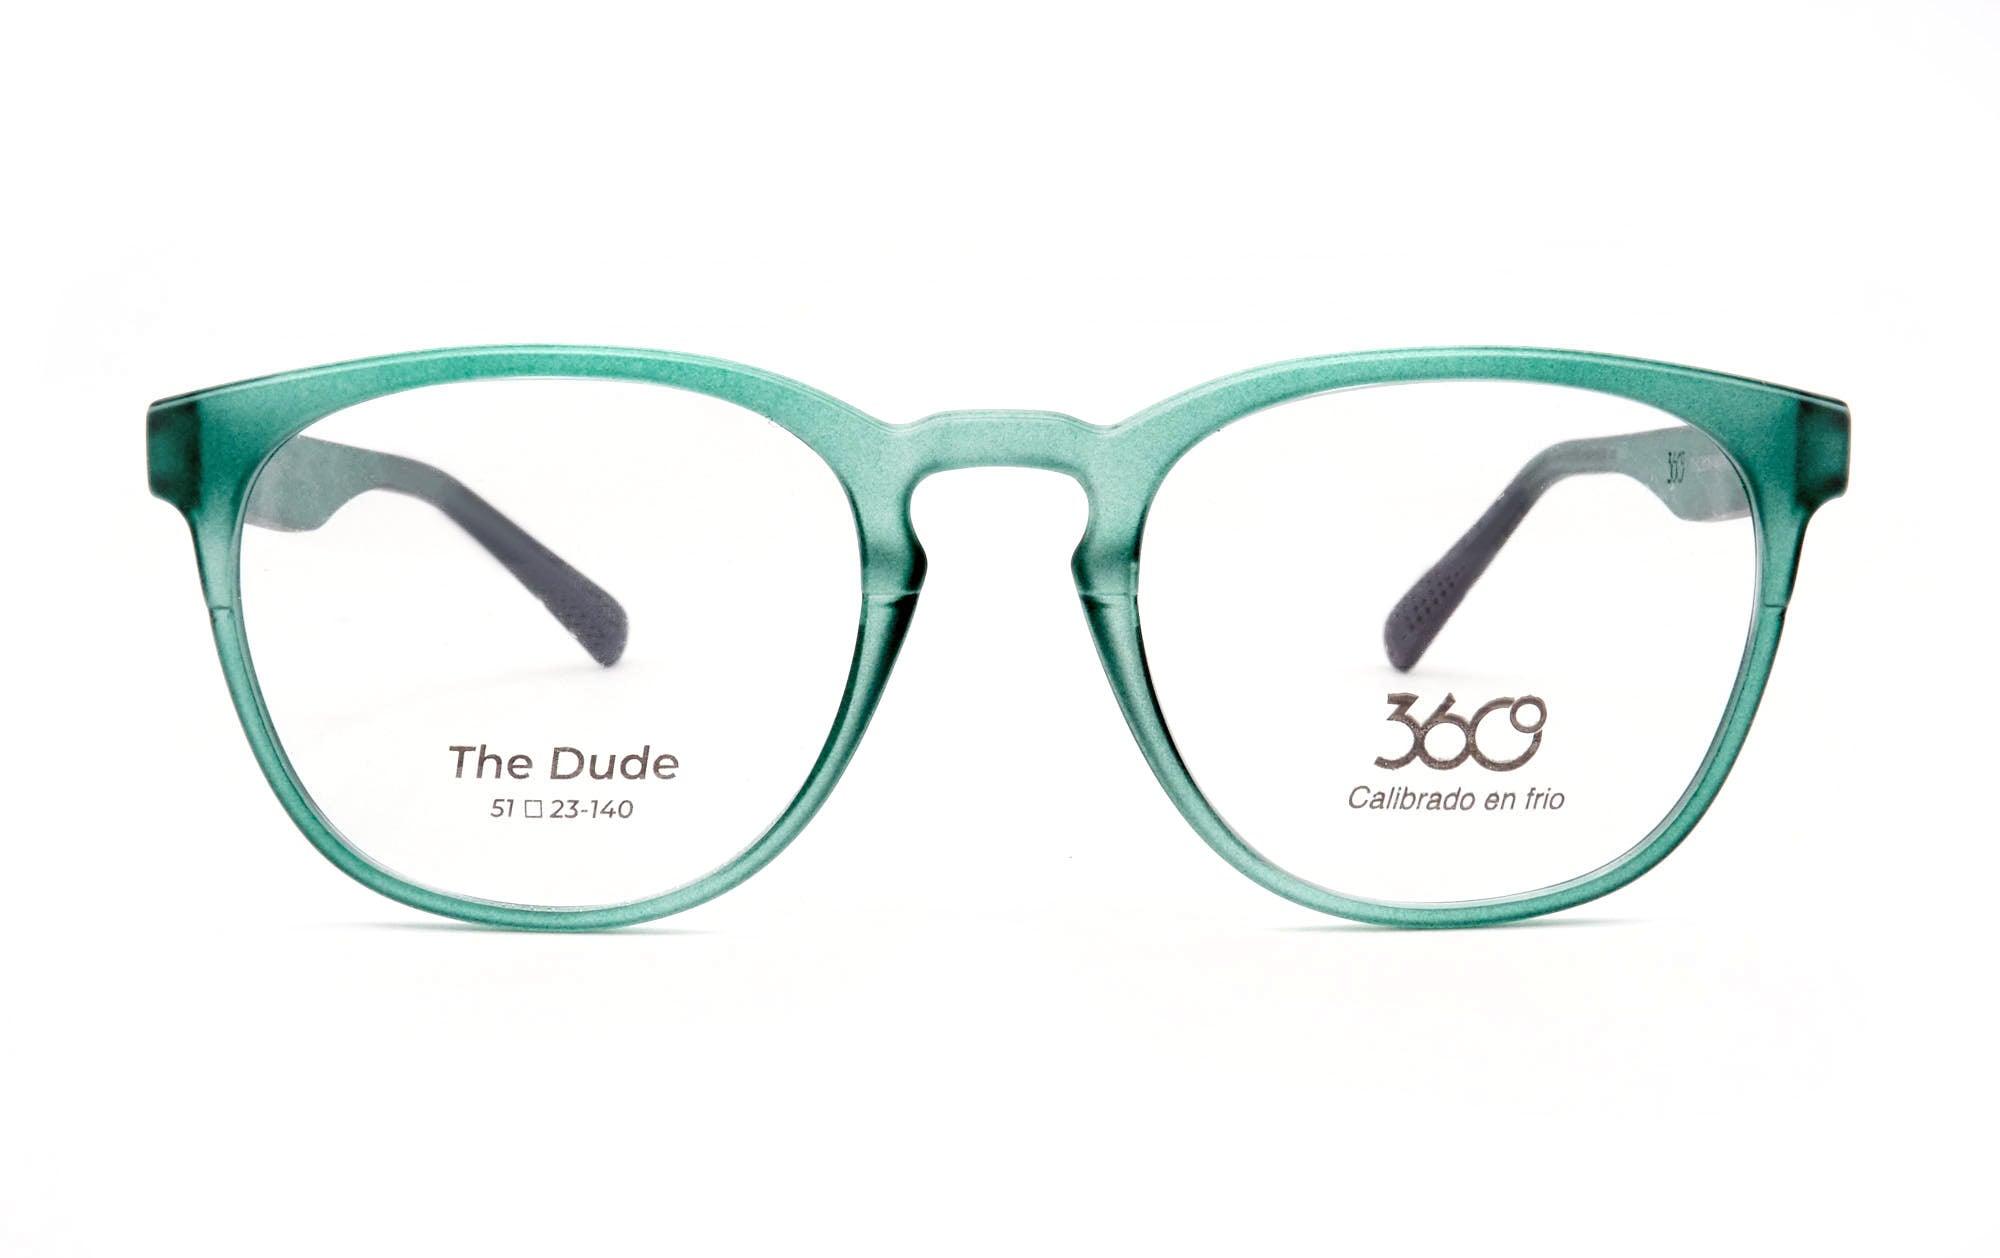 360 the dude 06 - Opticas Lookout